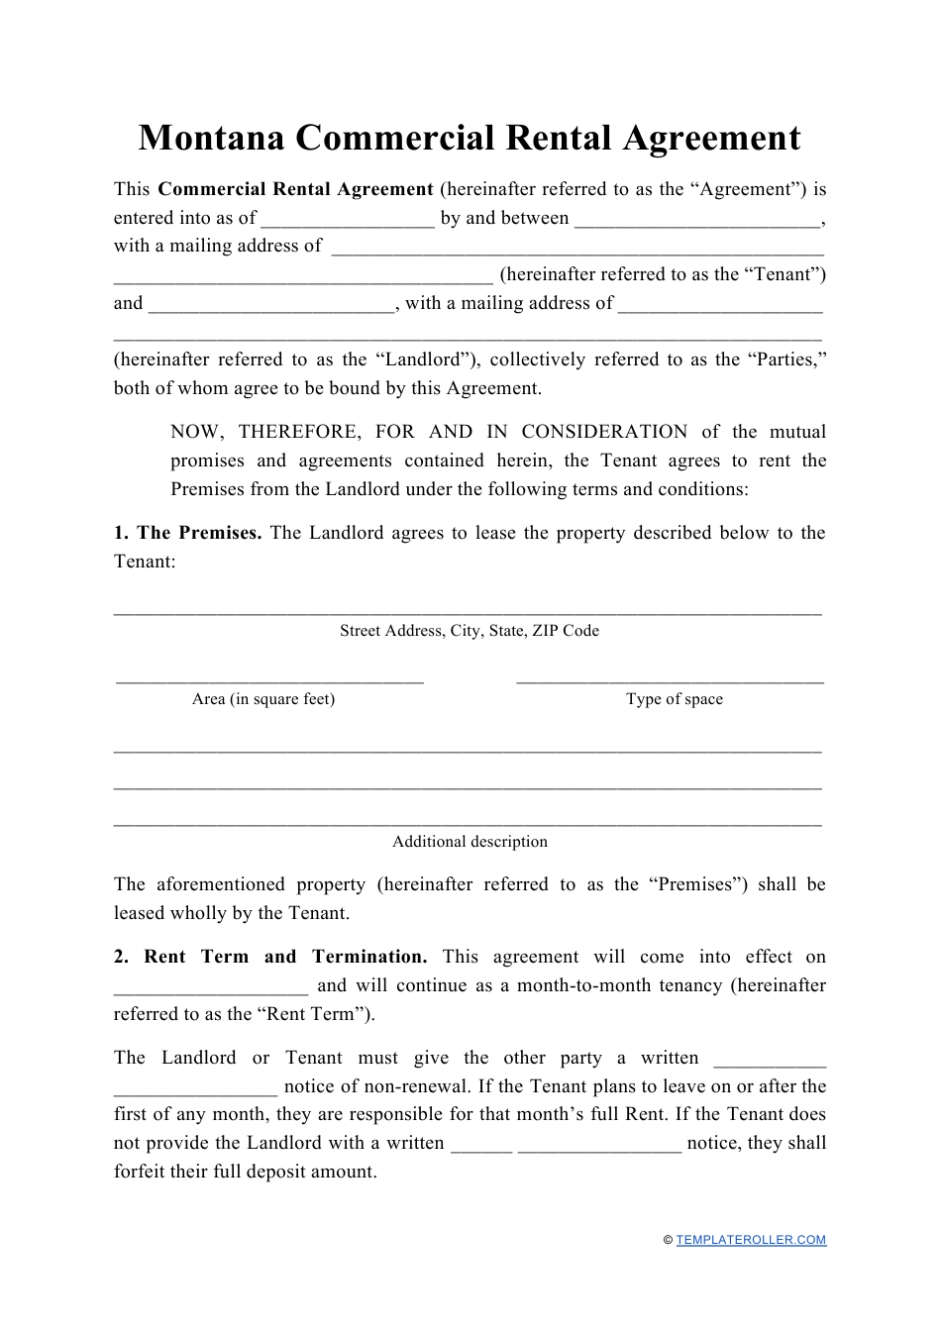 Montana Commercial Rental Agreement Template Download Printable Pdf With Free Printable Commercial Lease Agreement Template